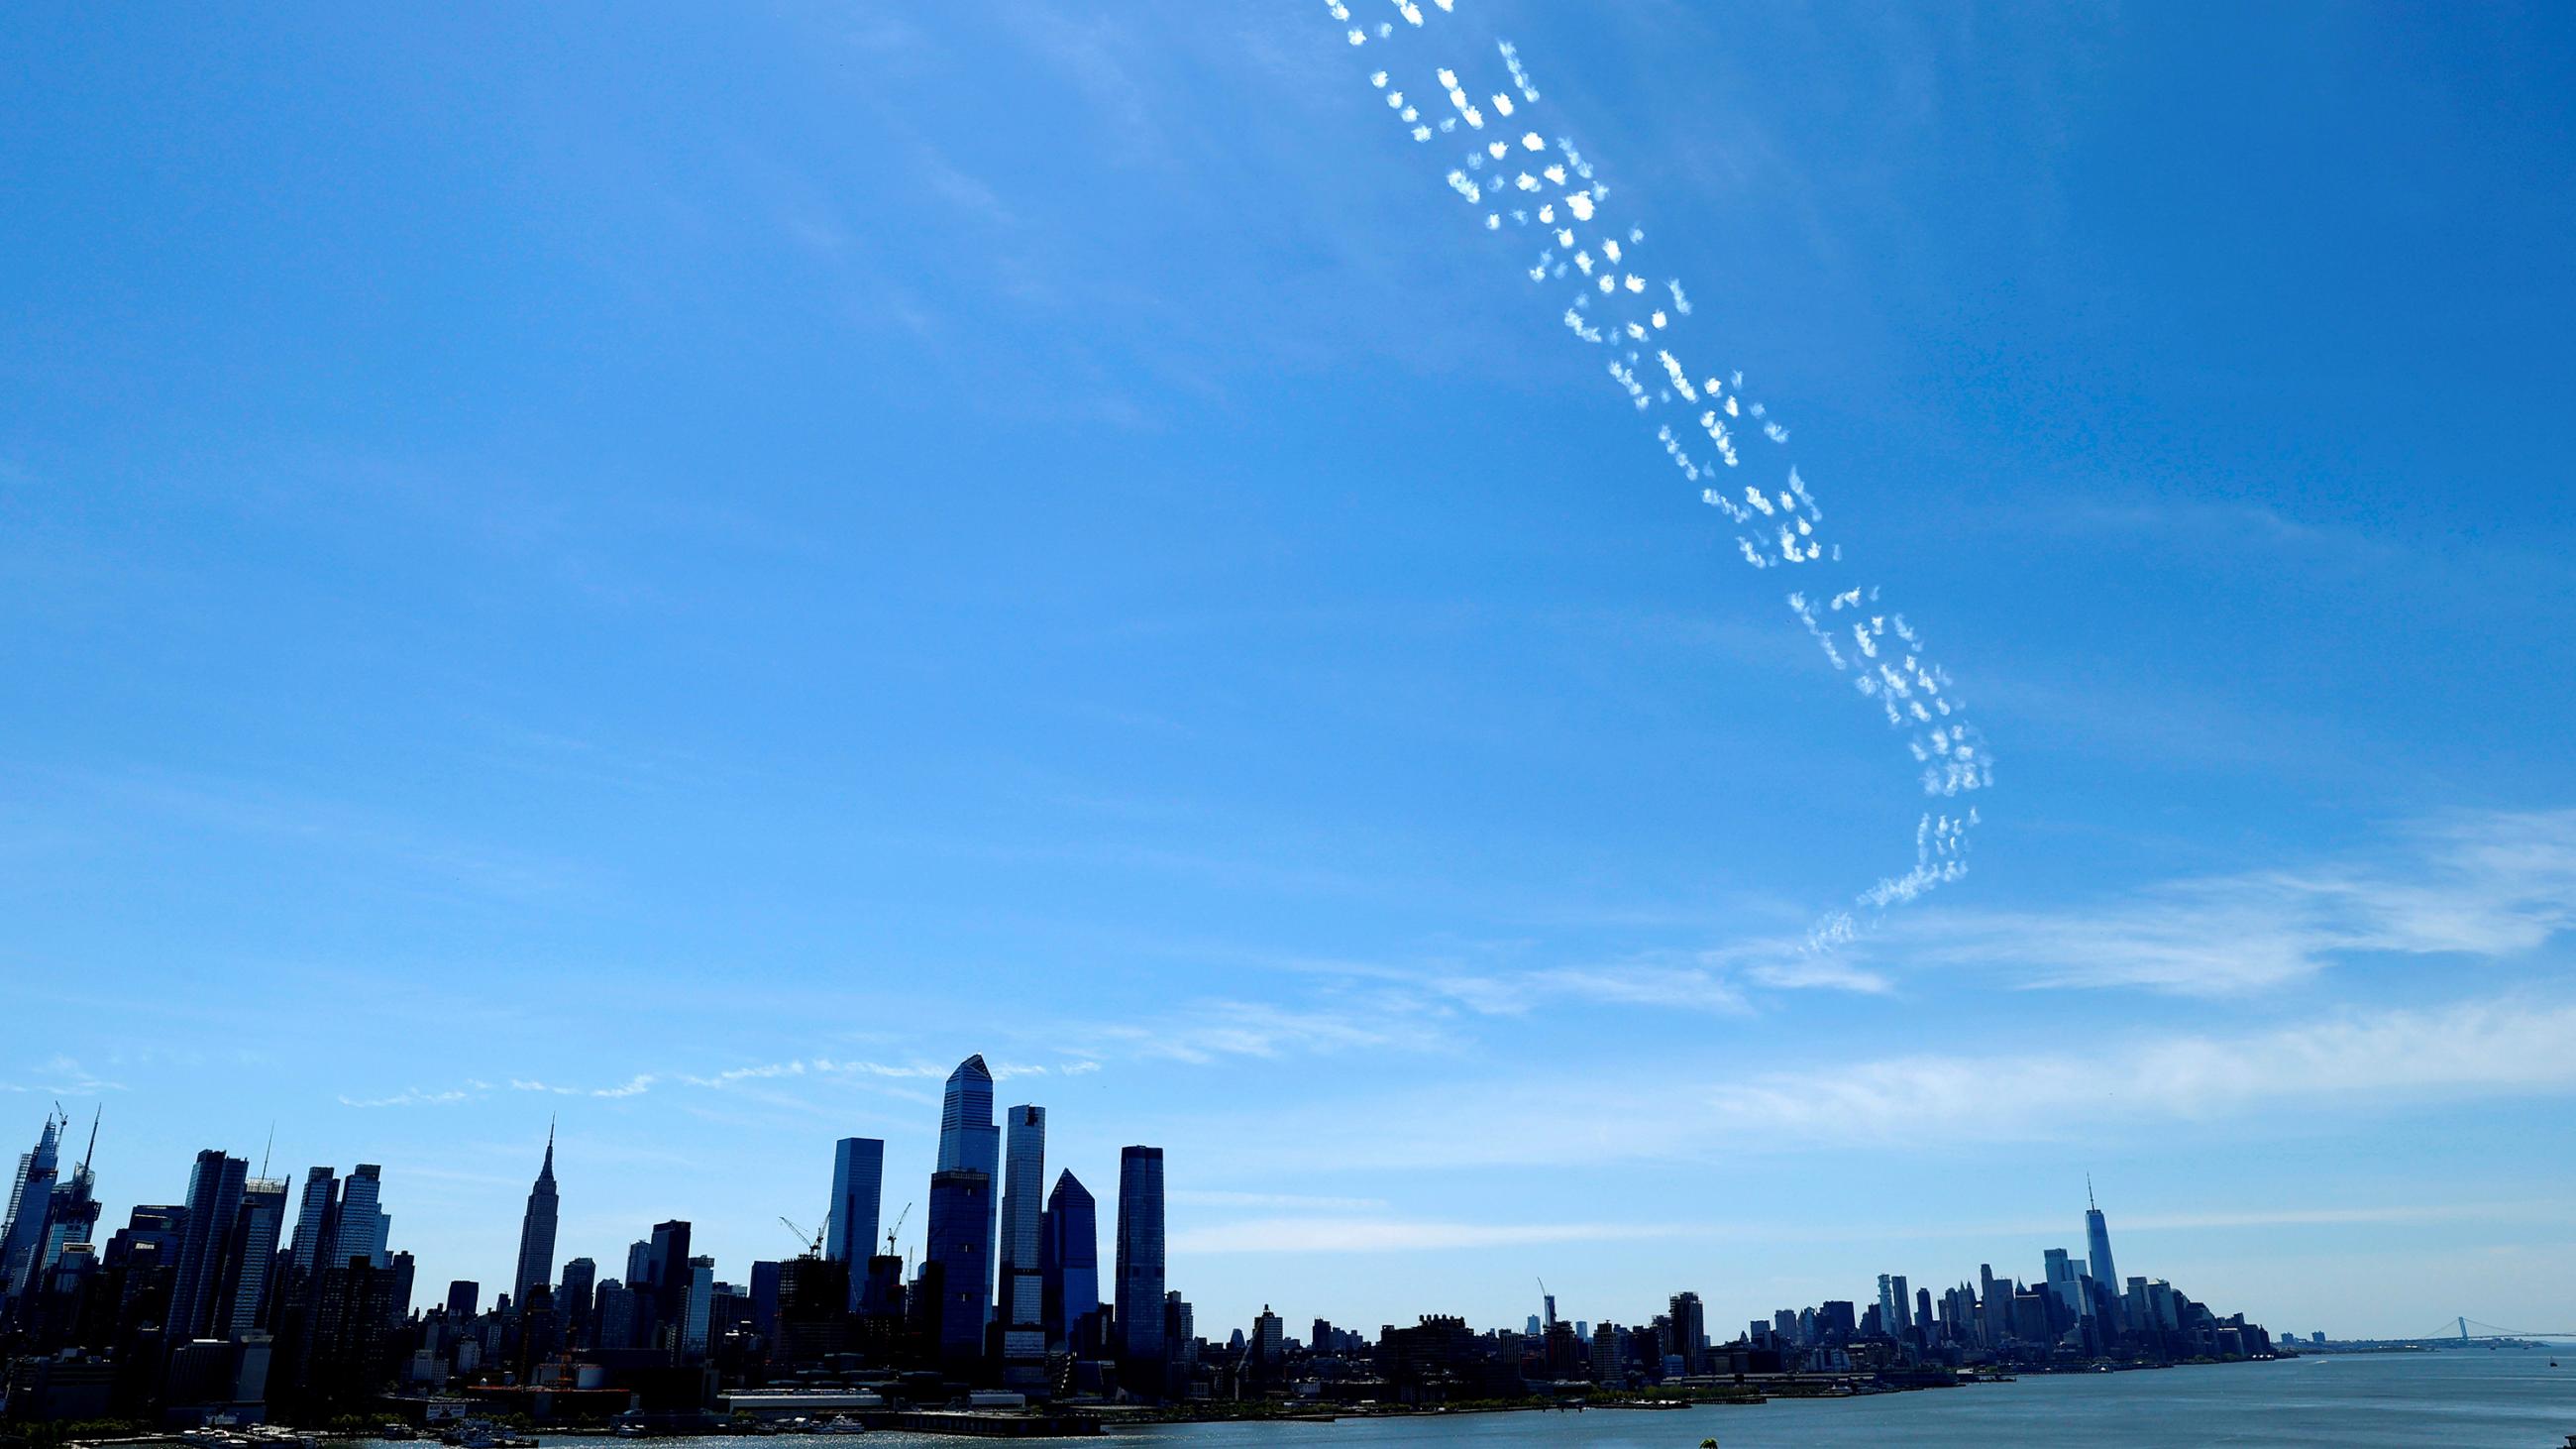 The photo shows the skyline of New York from a distance with a skywriting message visible above the city on a crystal-clear, blue-sky day. 